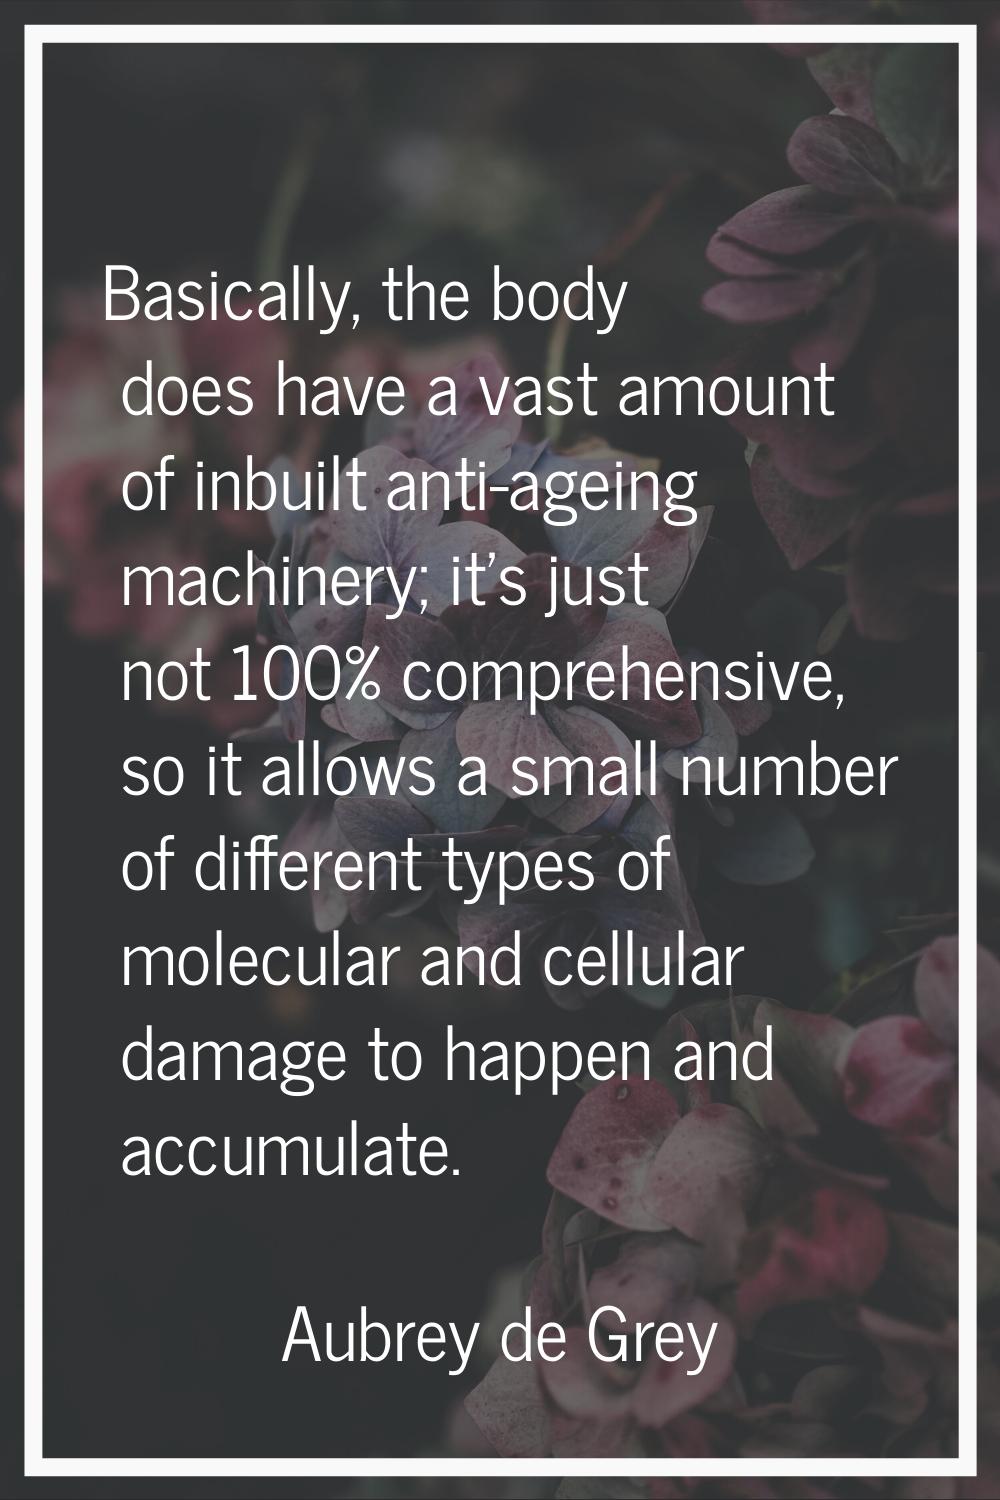 Basically, the body does have a vast amount of inbuilt anti-ageing machinery; it's just not 100% co